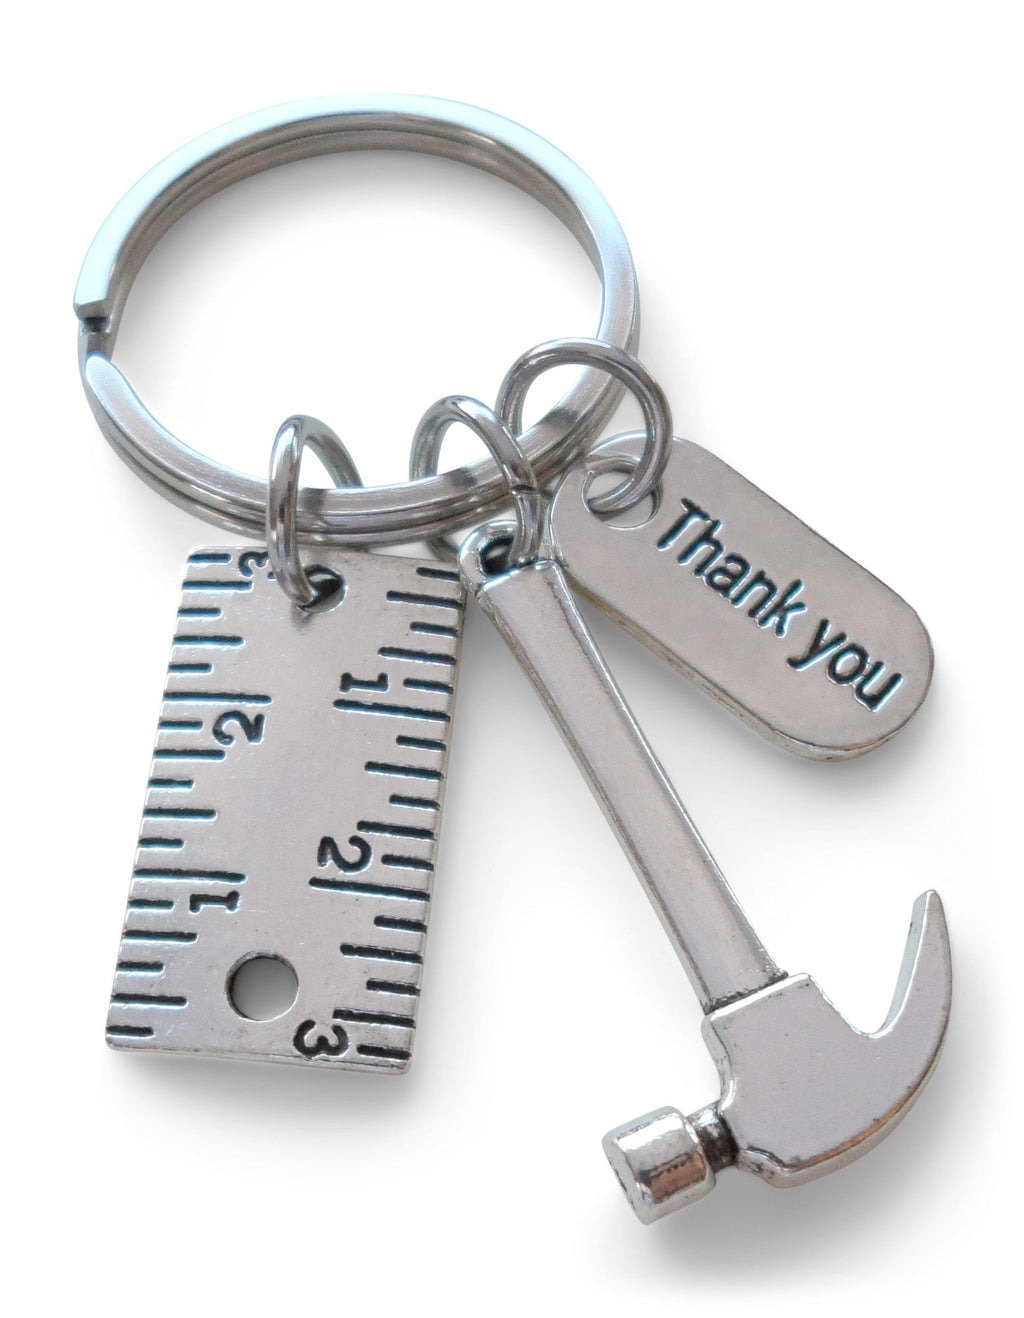 Hammer & Ruler Charm Keychain with Thank You Tag, Builders, Construction Team, Contractor, Handyman Appreciation Keychain